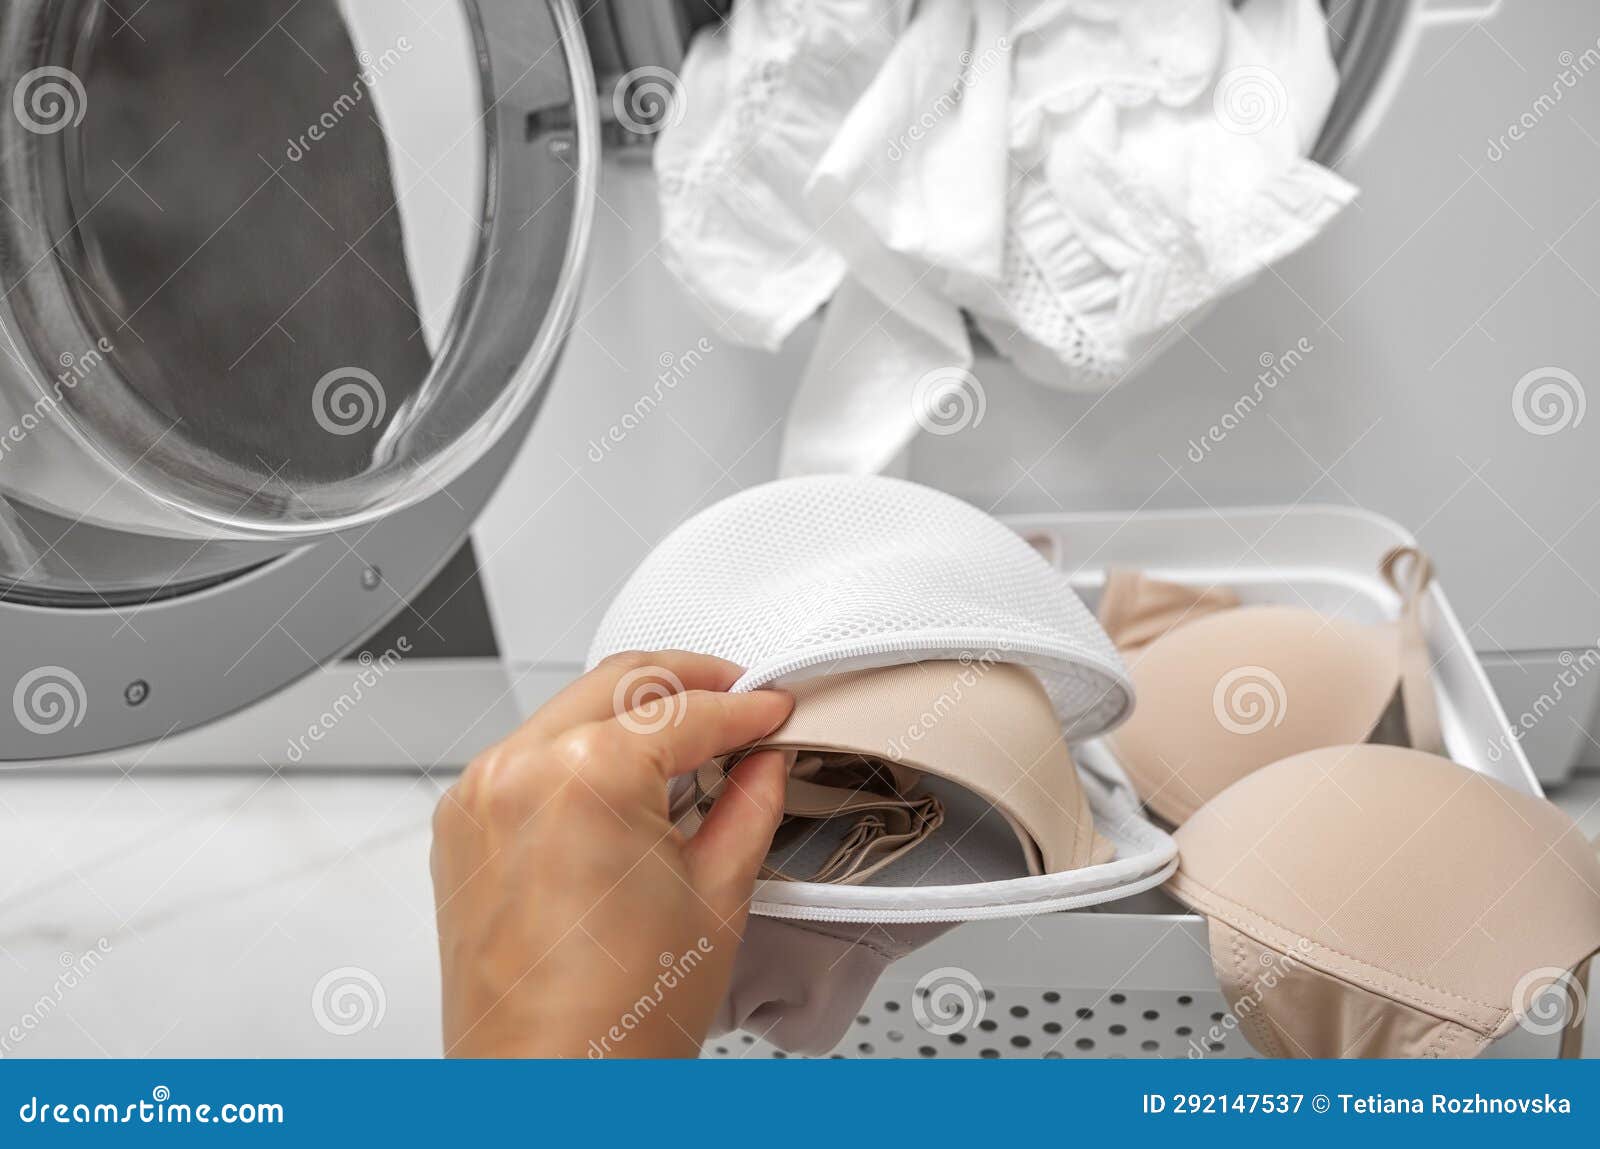 Washing Underwear Stock Photos and Images - 123RF